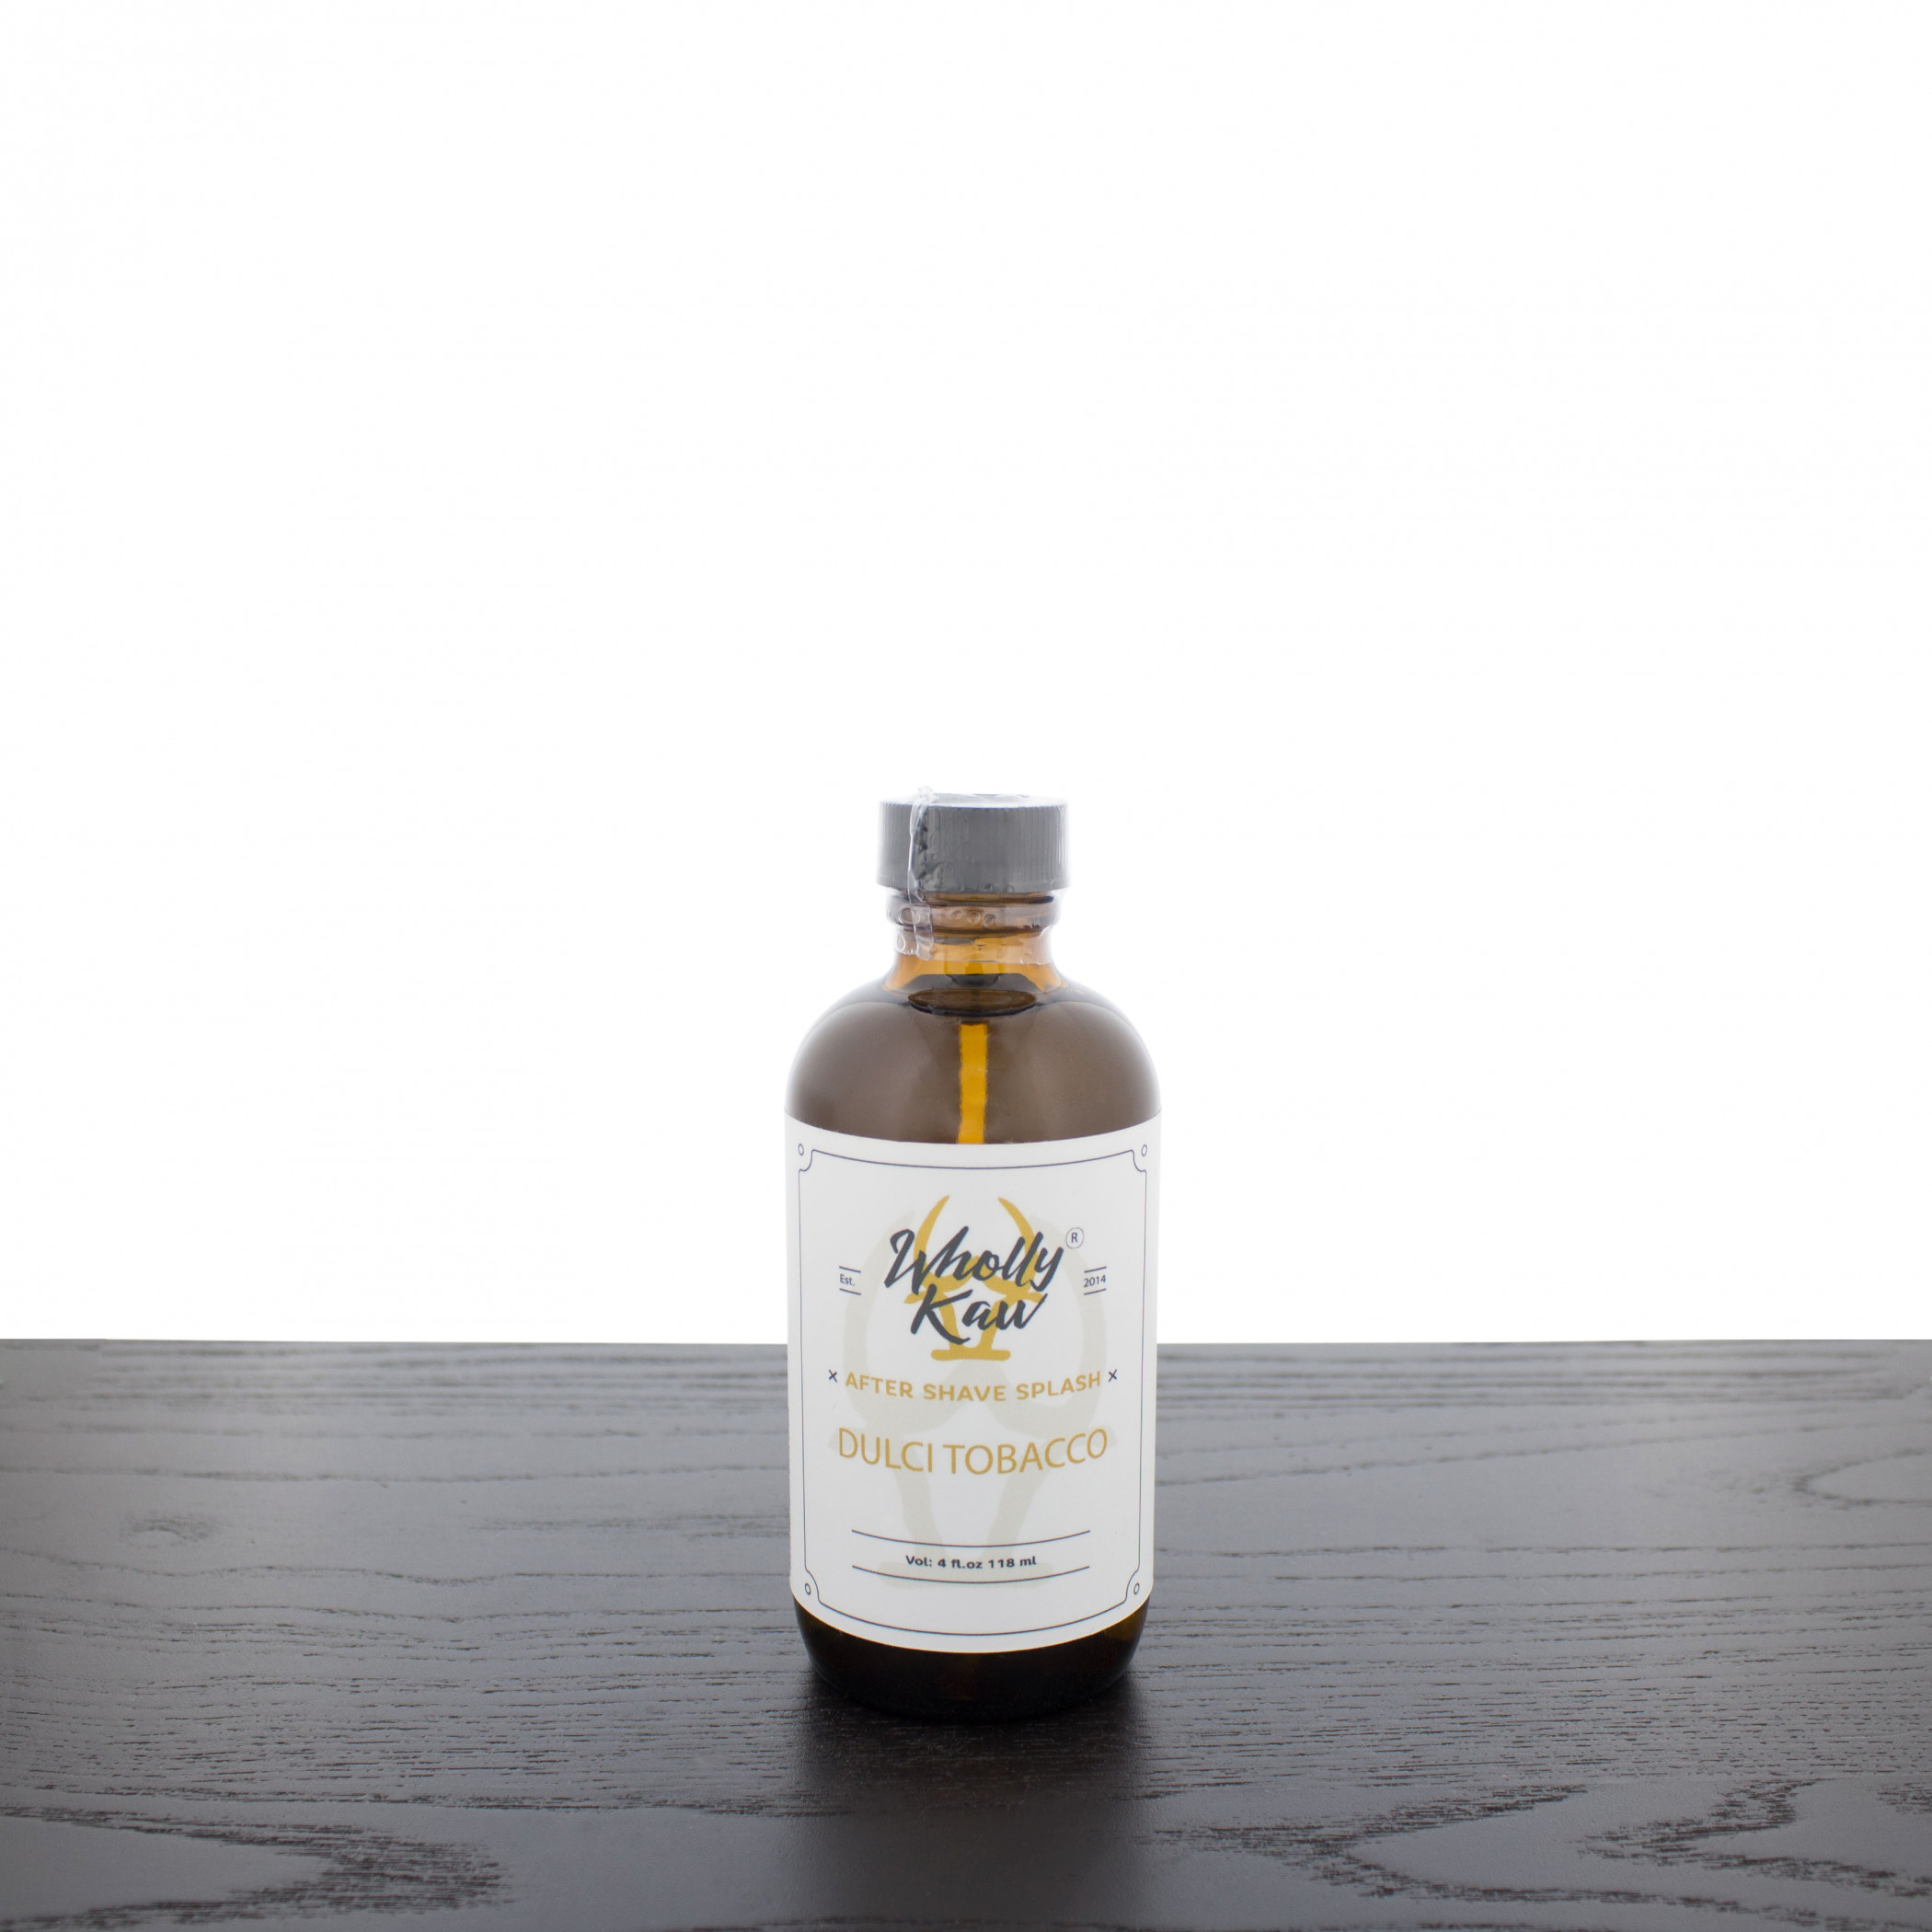 Product image 0 for Wholly Kaw After Shave Splash, Dulci Tobacco